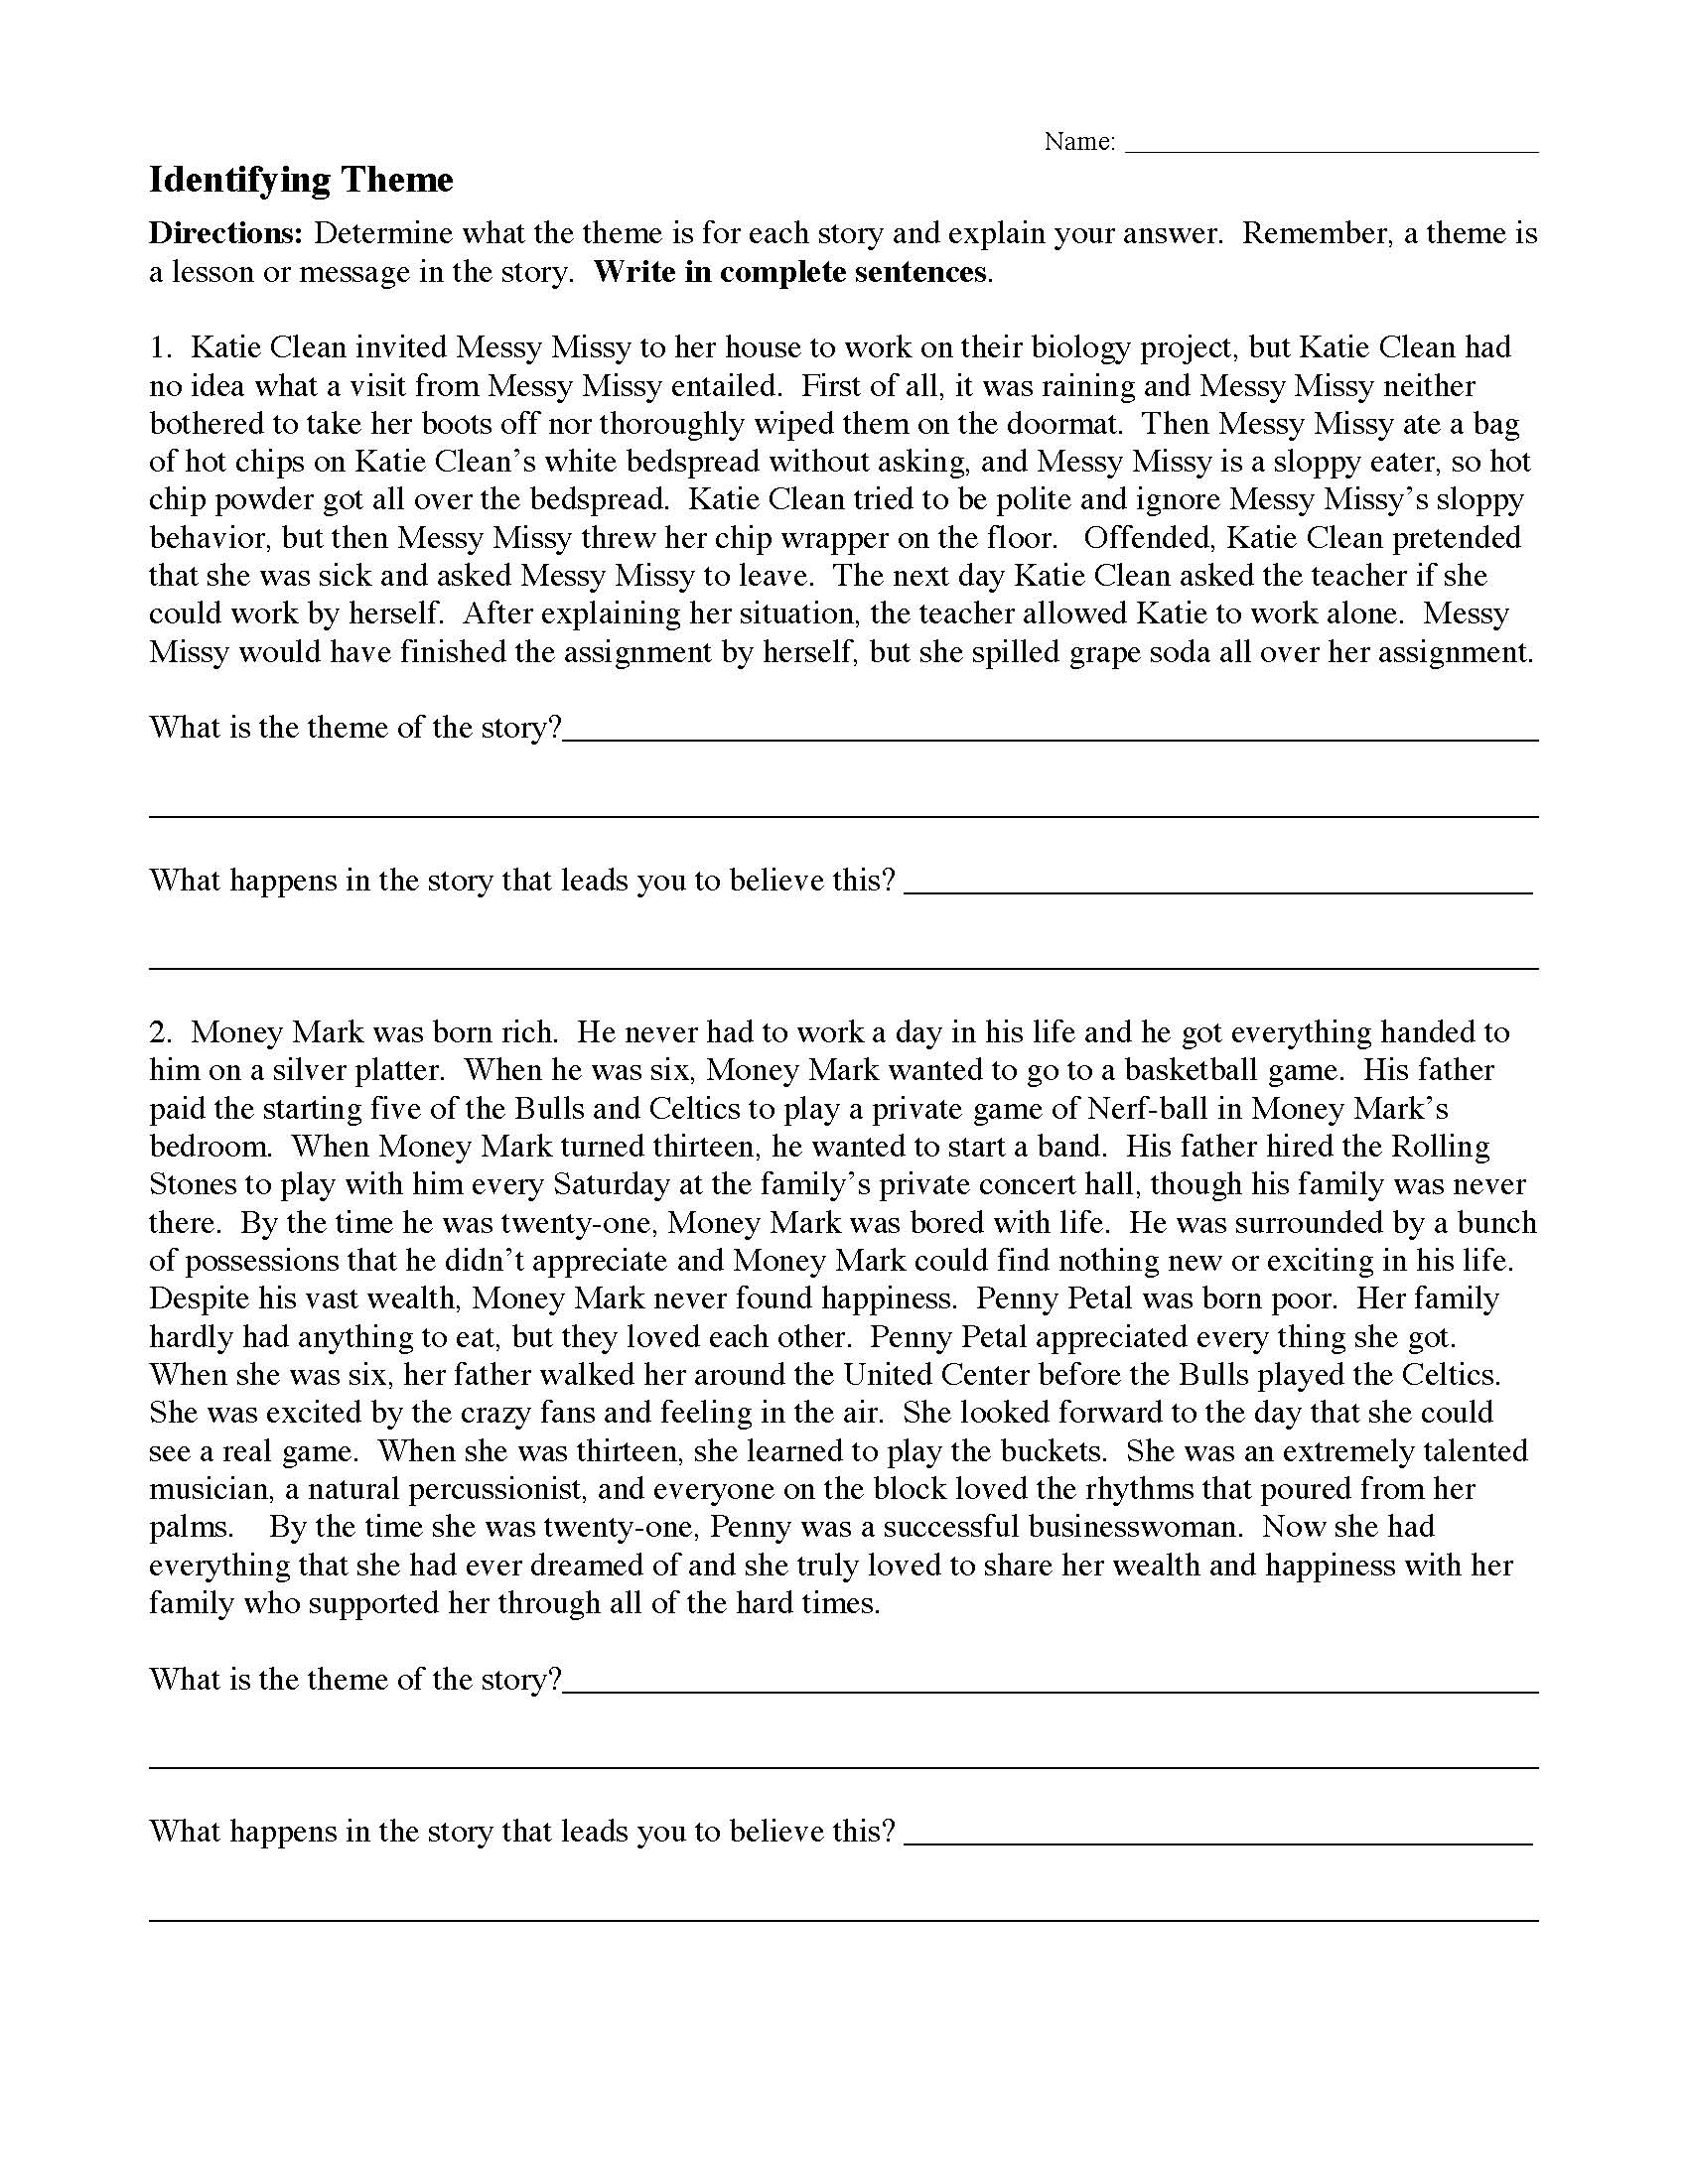 theme-worksheet-1-preview